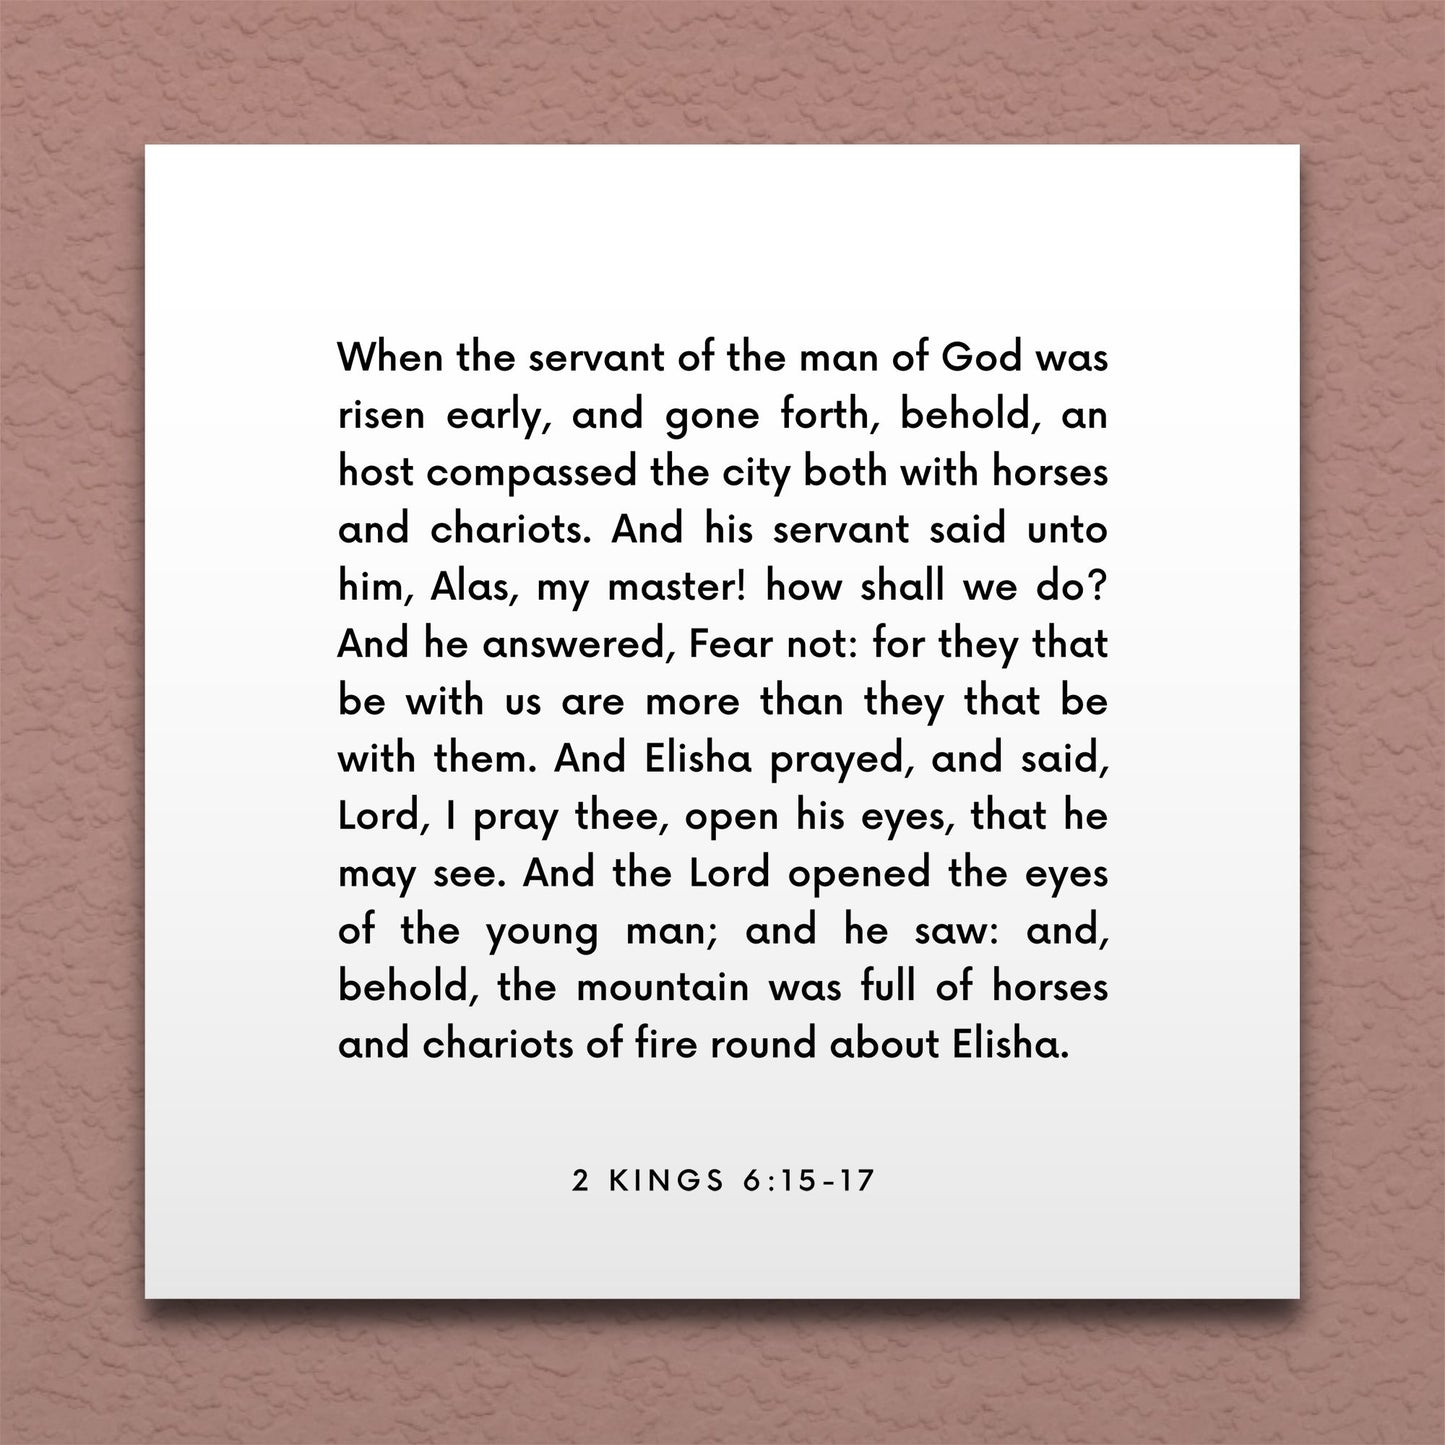 Wall-mounted scripture tile for 2 Kings 6:15-17 - "They that be with us are more than they that be with them"